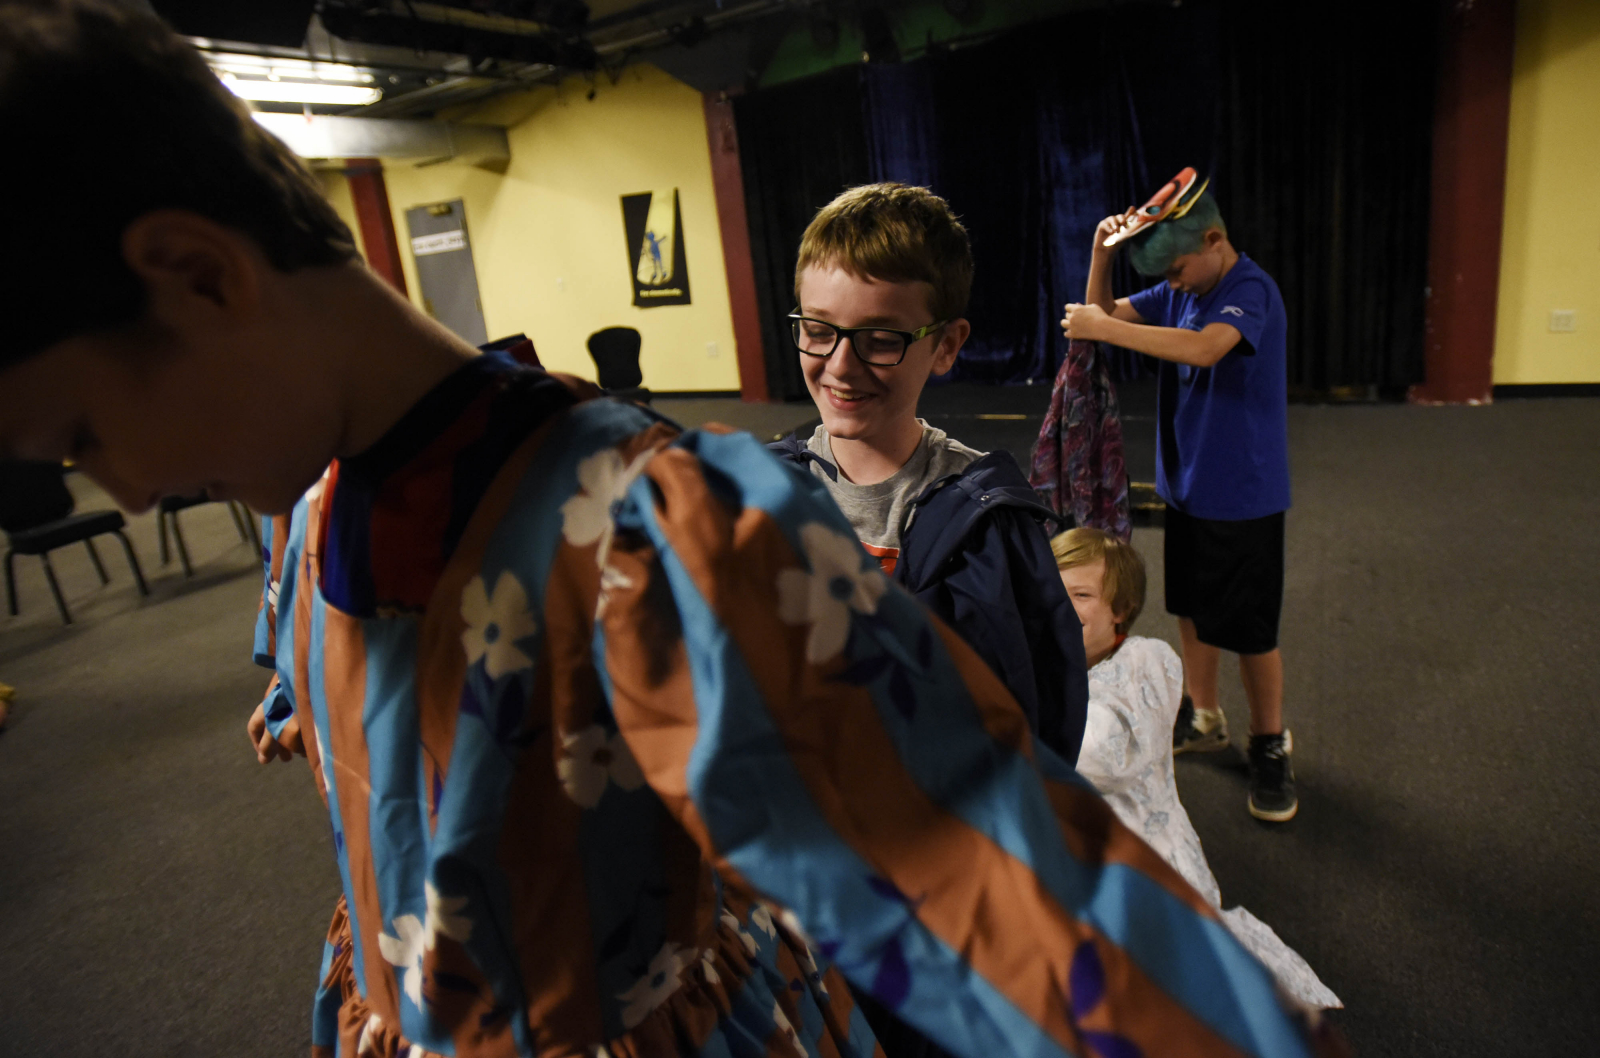 Improv Anywhere! campers create one-word stories during their first day at Proctors Monday, July 17, 2017.